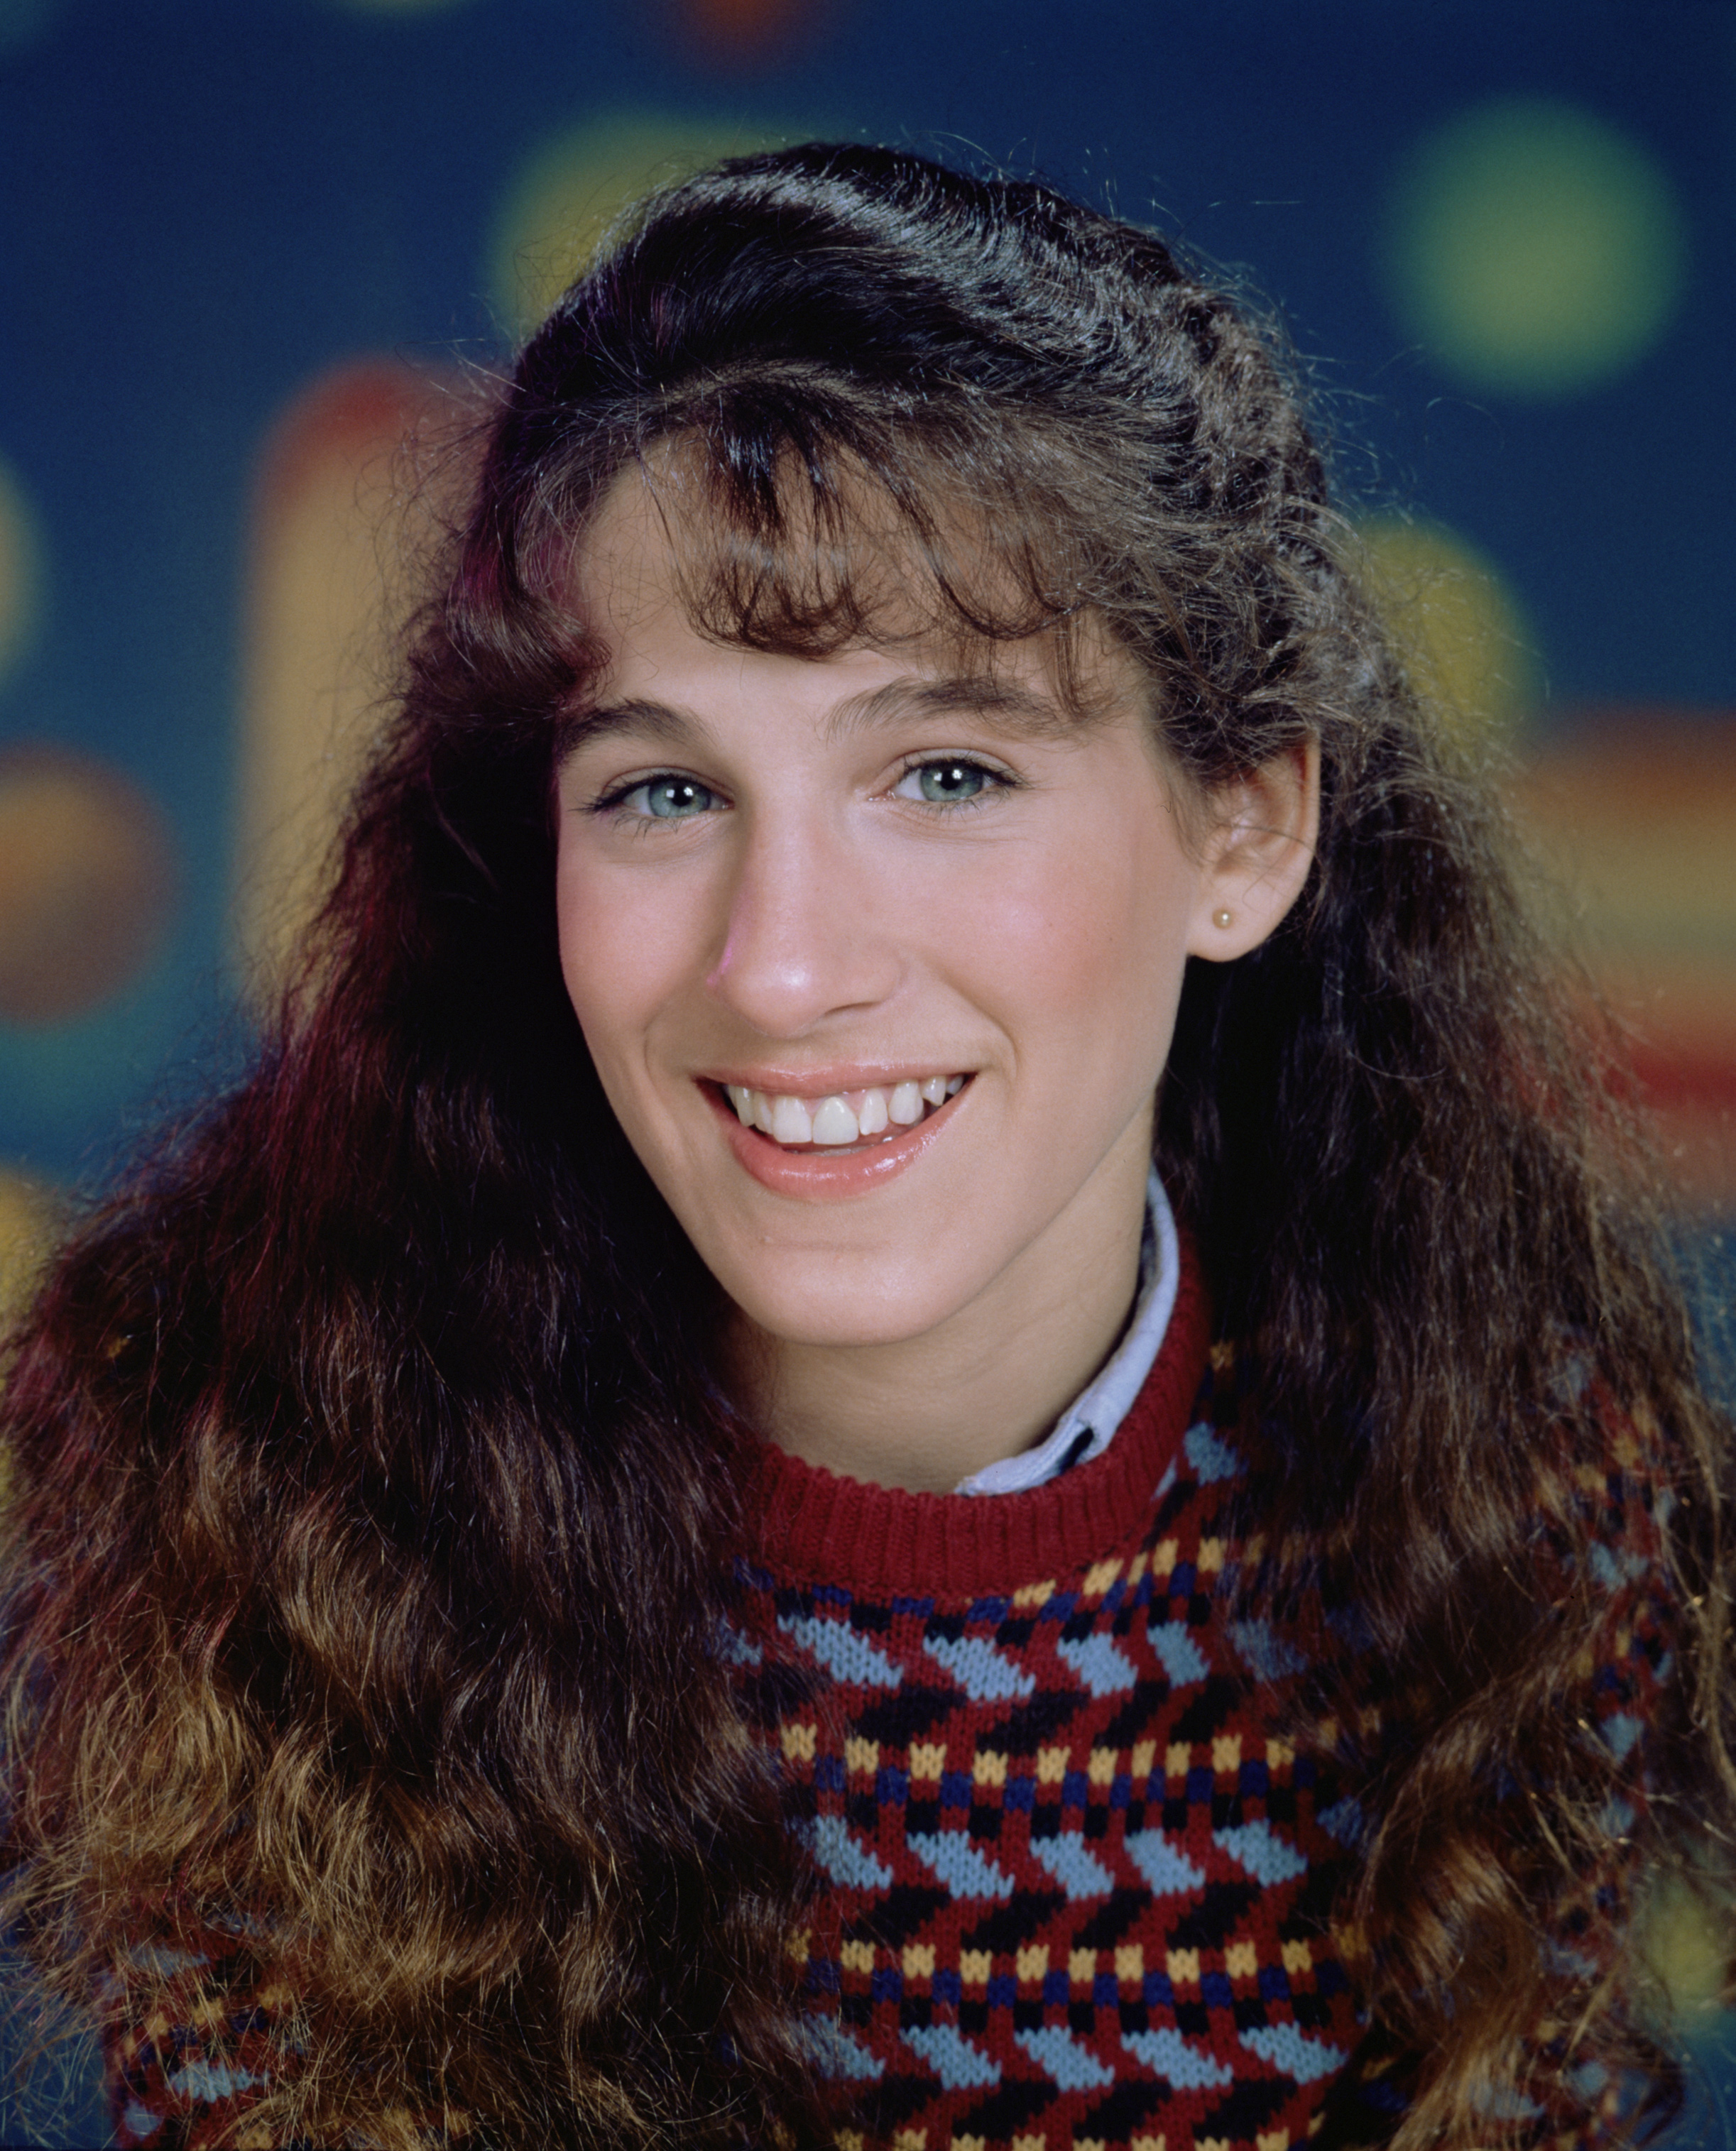 Sarah Jessica Parker in "Square Pegs," in 1982 | Source: Getty Images